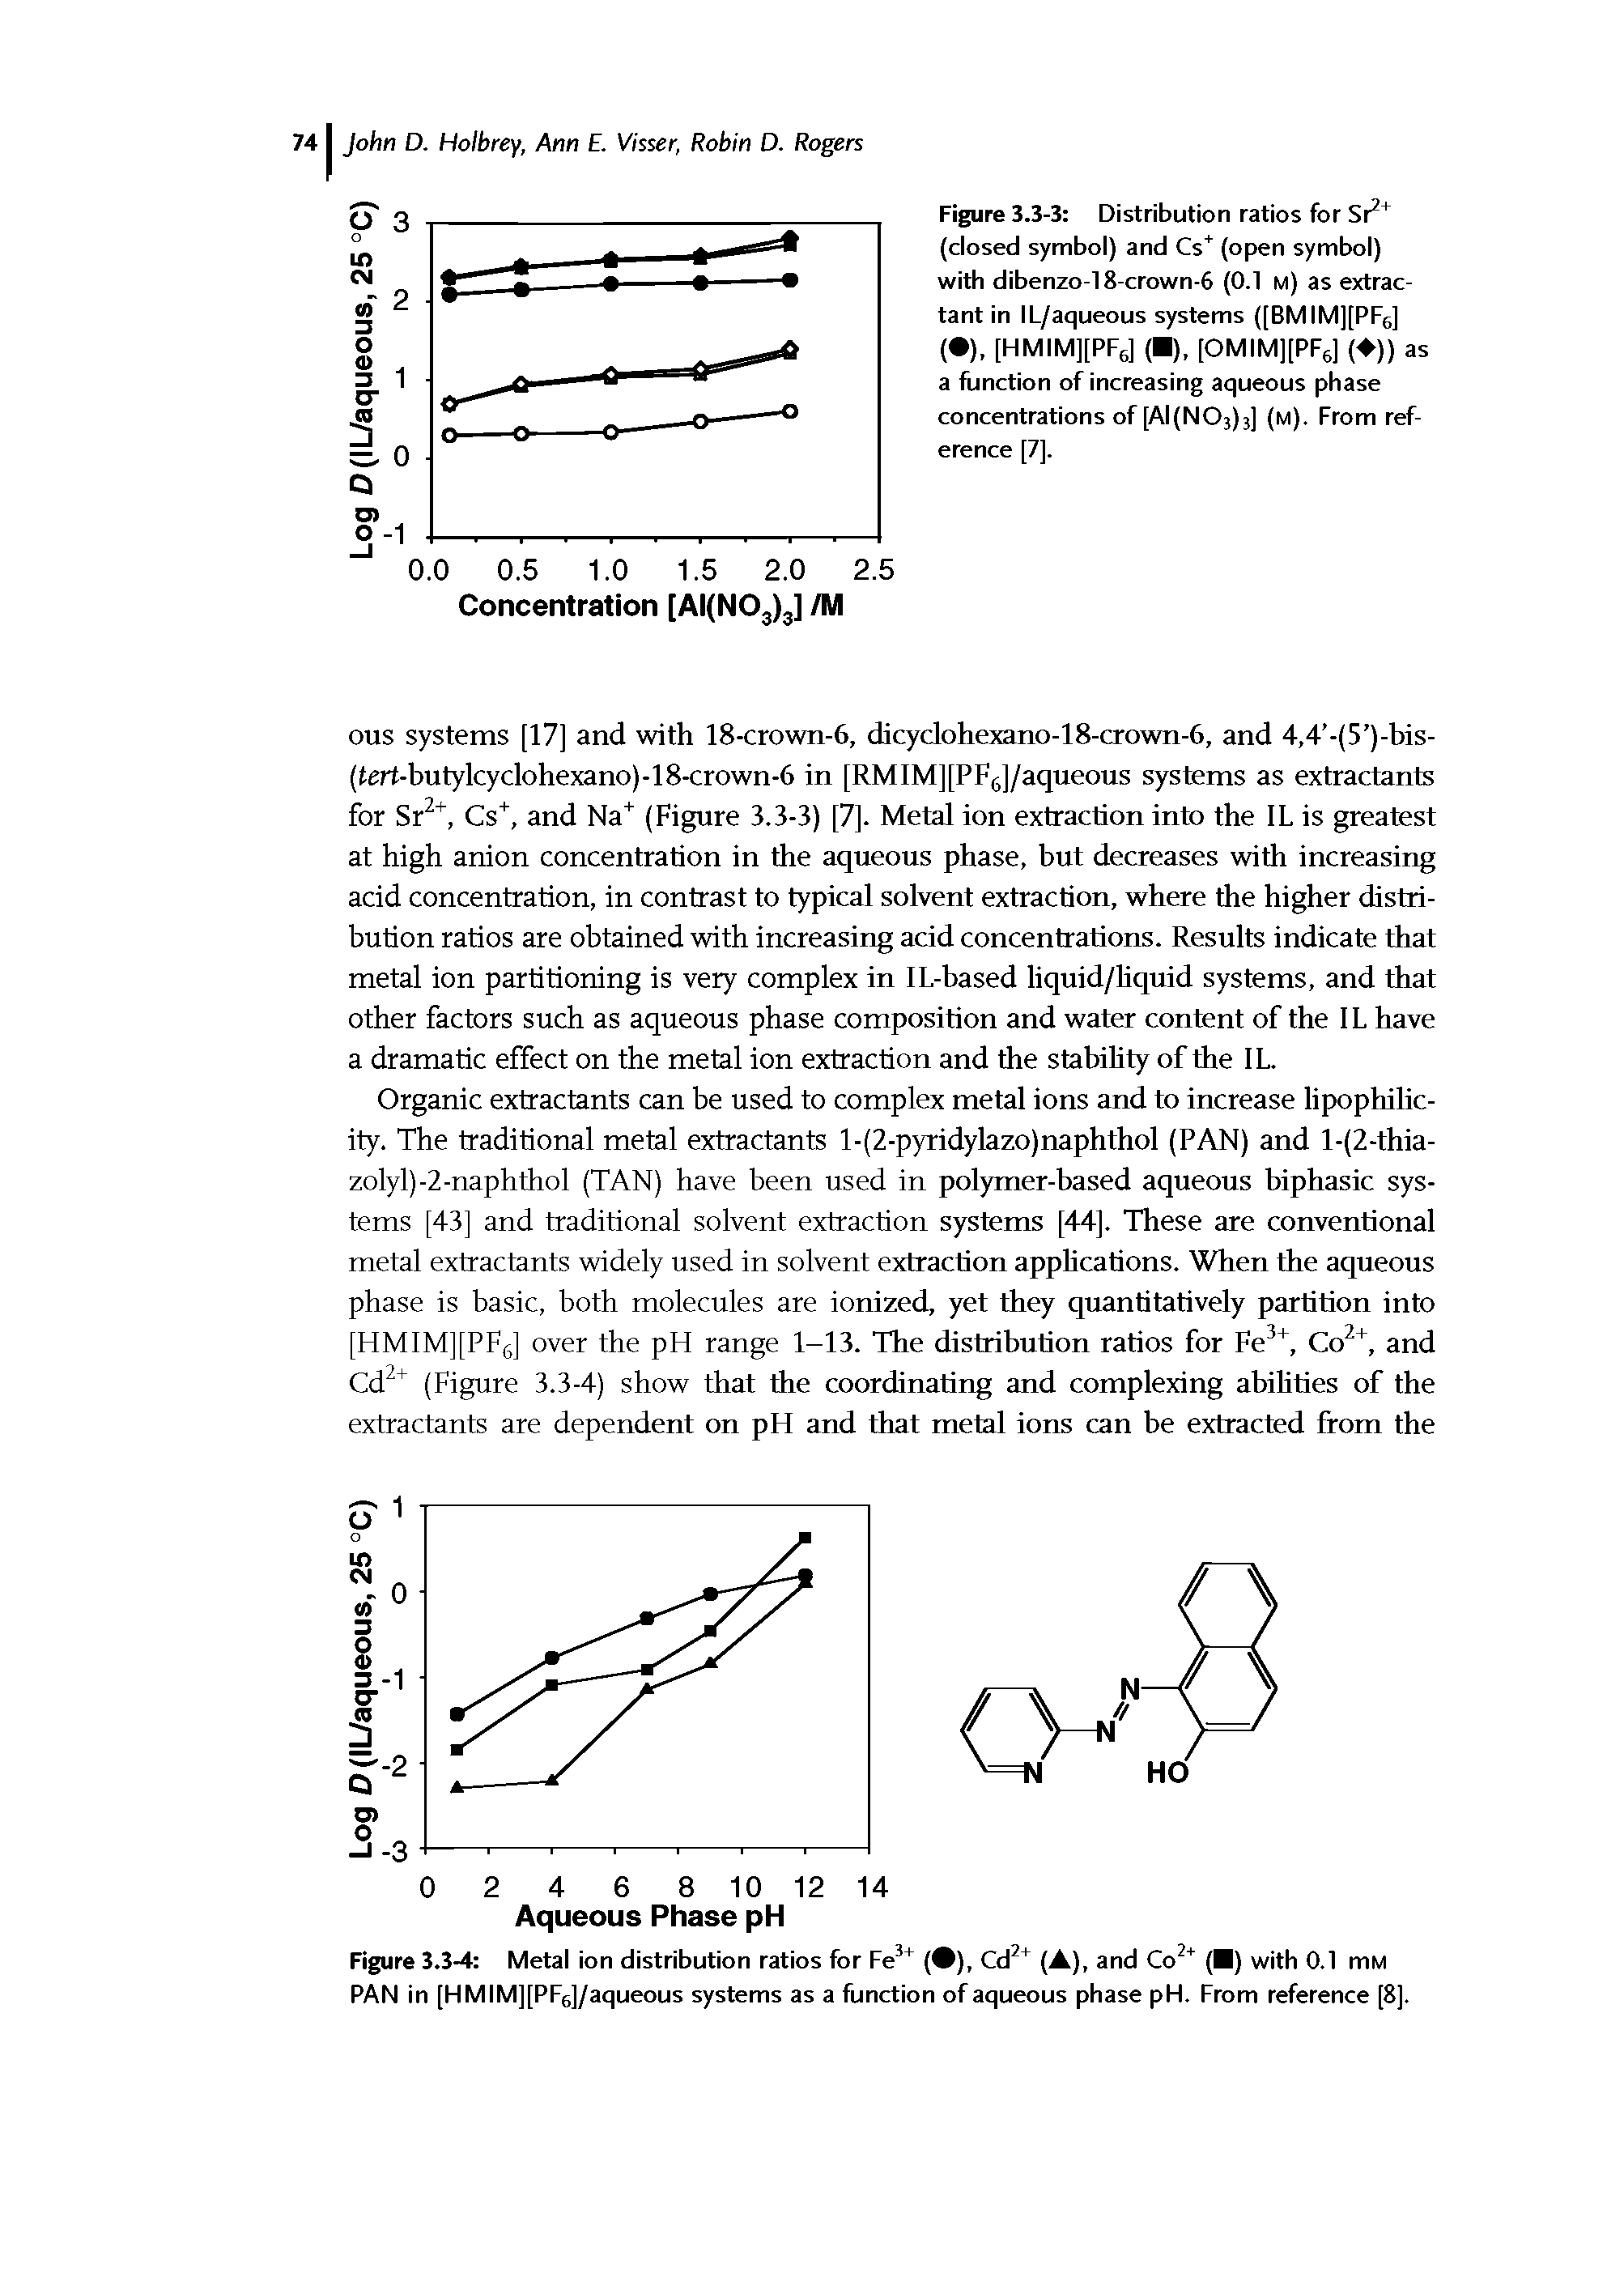 Figure 3.3-4 Metal ion distribution ratios for Fe3+ ( ), Cd2+ (A), and Co2+ ( ) with 0.1 mti PAN in [HMIM][PF6]/aqueous systems as a function of aqueous phase pH. From reference [8].